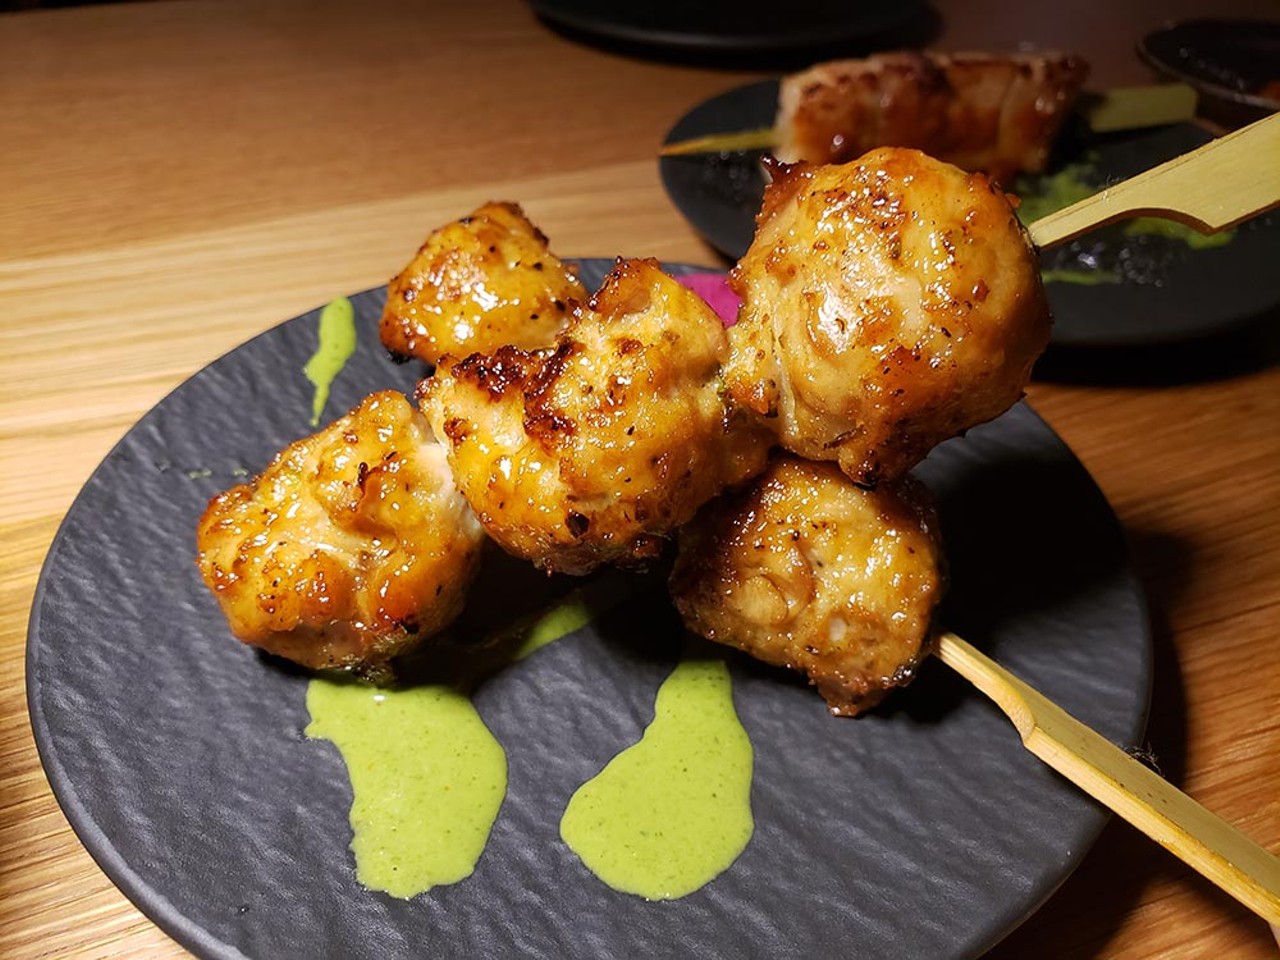 
Chicken meatballs, Doshi
There's a lot to like at this contemporary Korean restaurant, but these tender and buoyant wonders had us wanting more. The minced leg meat is poached, then grilled over binchotan coals to create texturally perfect orbs.
